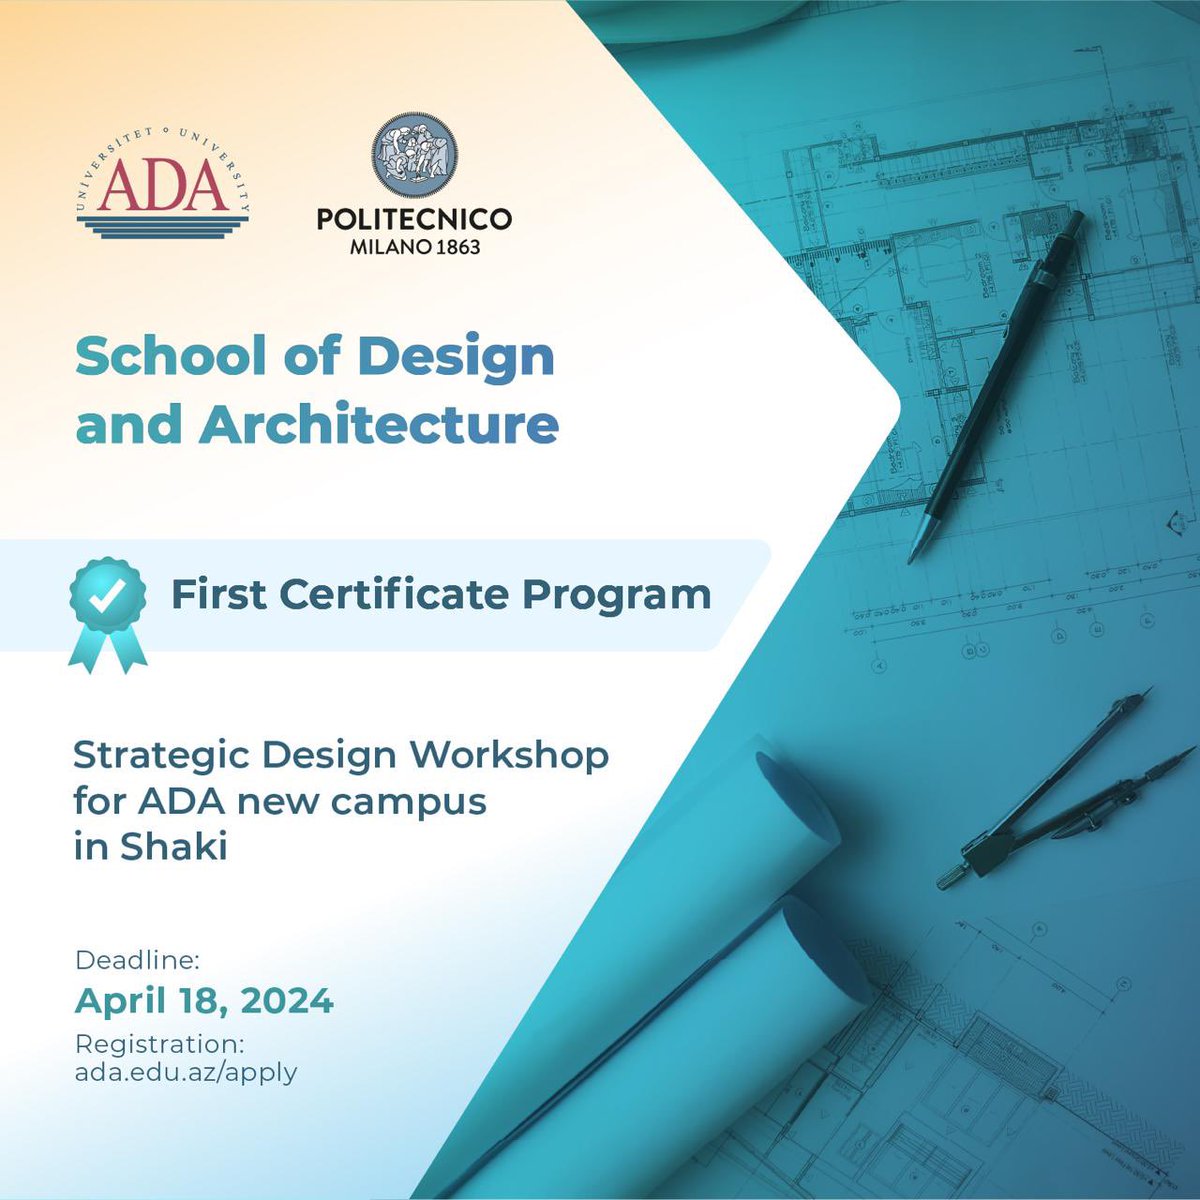 ADA University School of Design and Architecture introduces its first Certificate Program, 'Strategic Design Workshop for ADA new Campus in Shaki'. More information: t.ly/lTYBV Application deadline: April 18, 2024